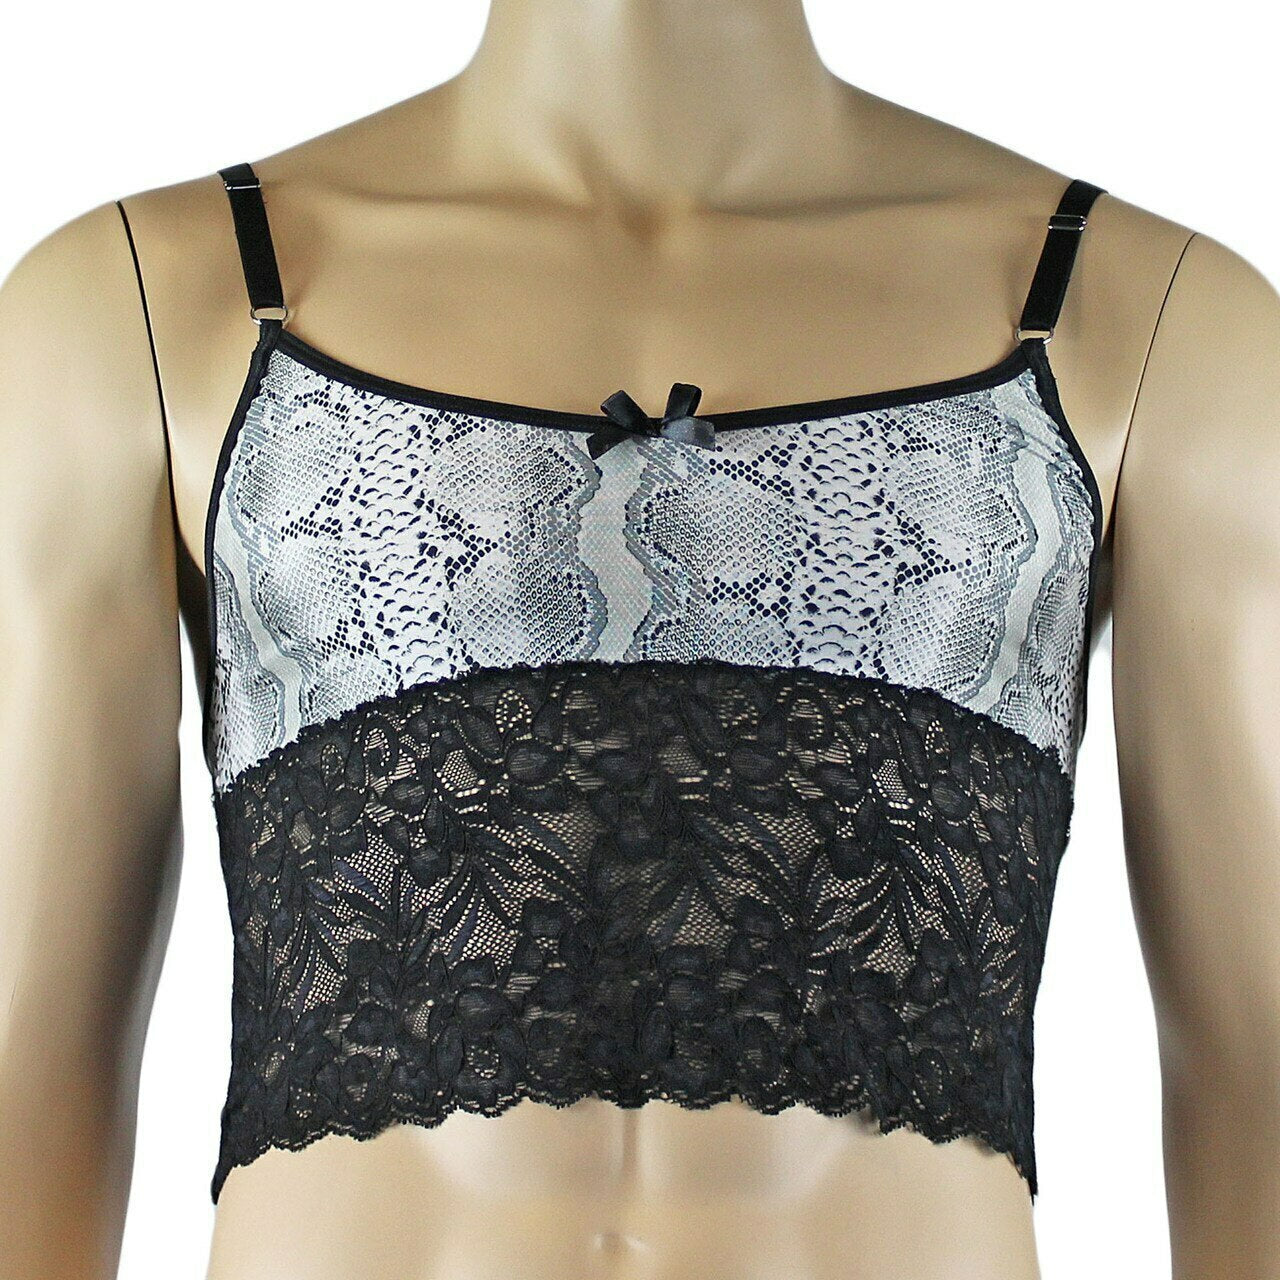 Mens Bra Top Camisole and Brief in Grey Snake Print & Black Lace